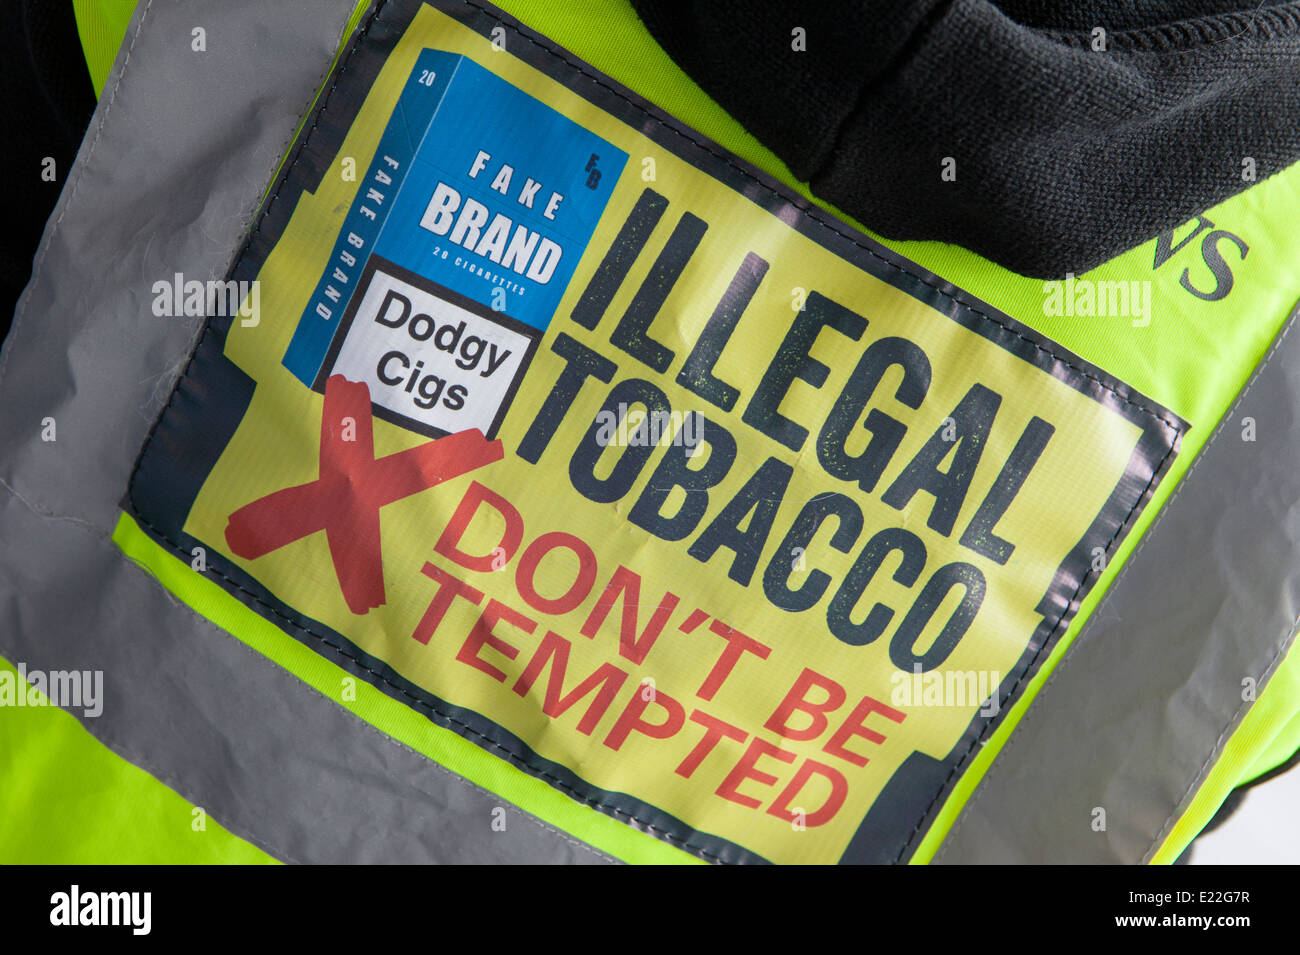 Fake Brand, Dodgy Cigs, Illegal tobacco hi-vis shirt, Don't be tempted, Jacket being worn in Manchester, UK Stock Photo